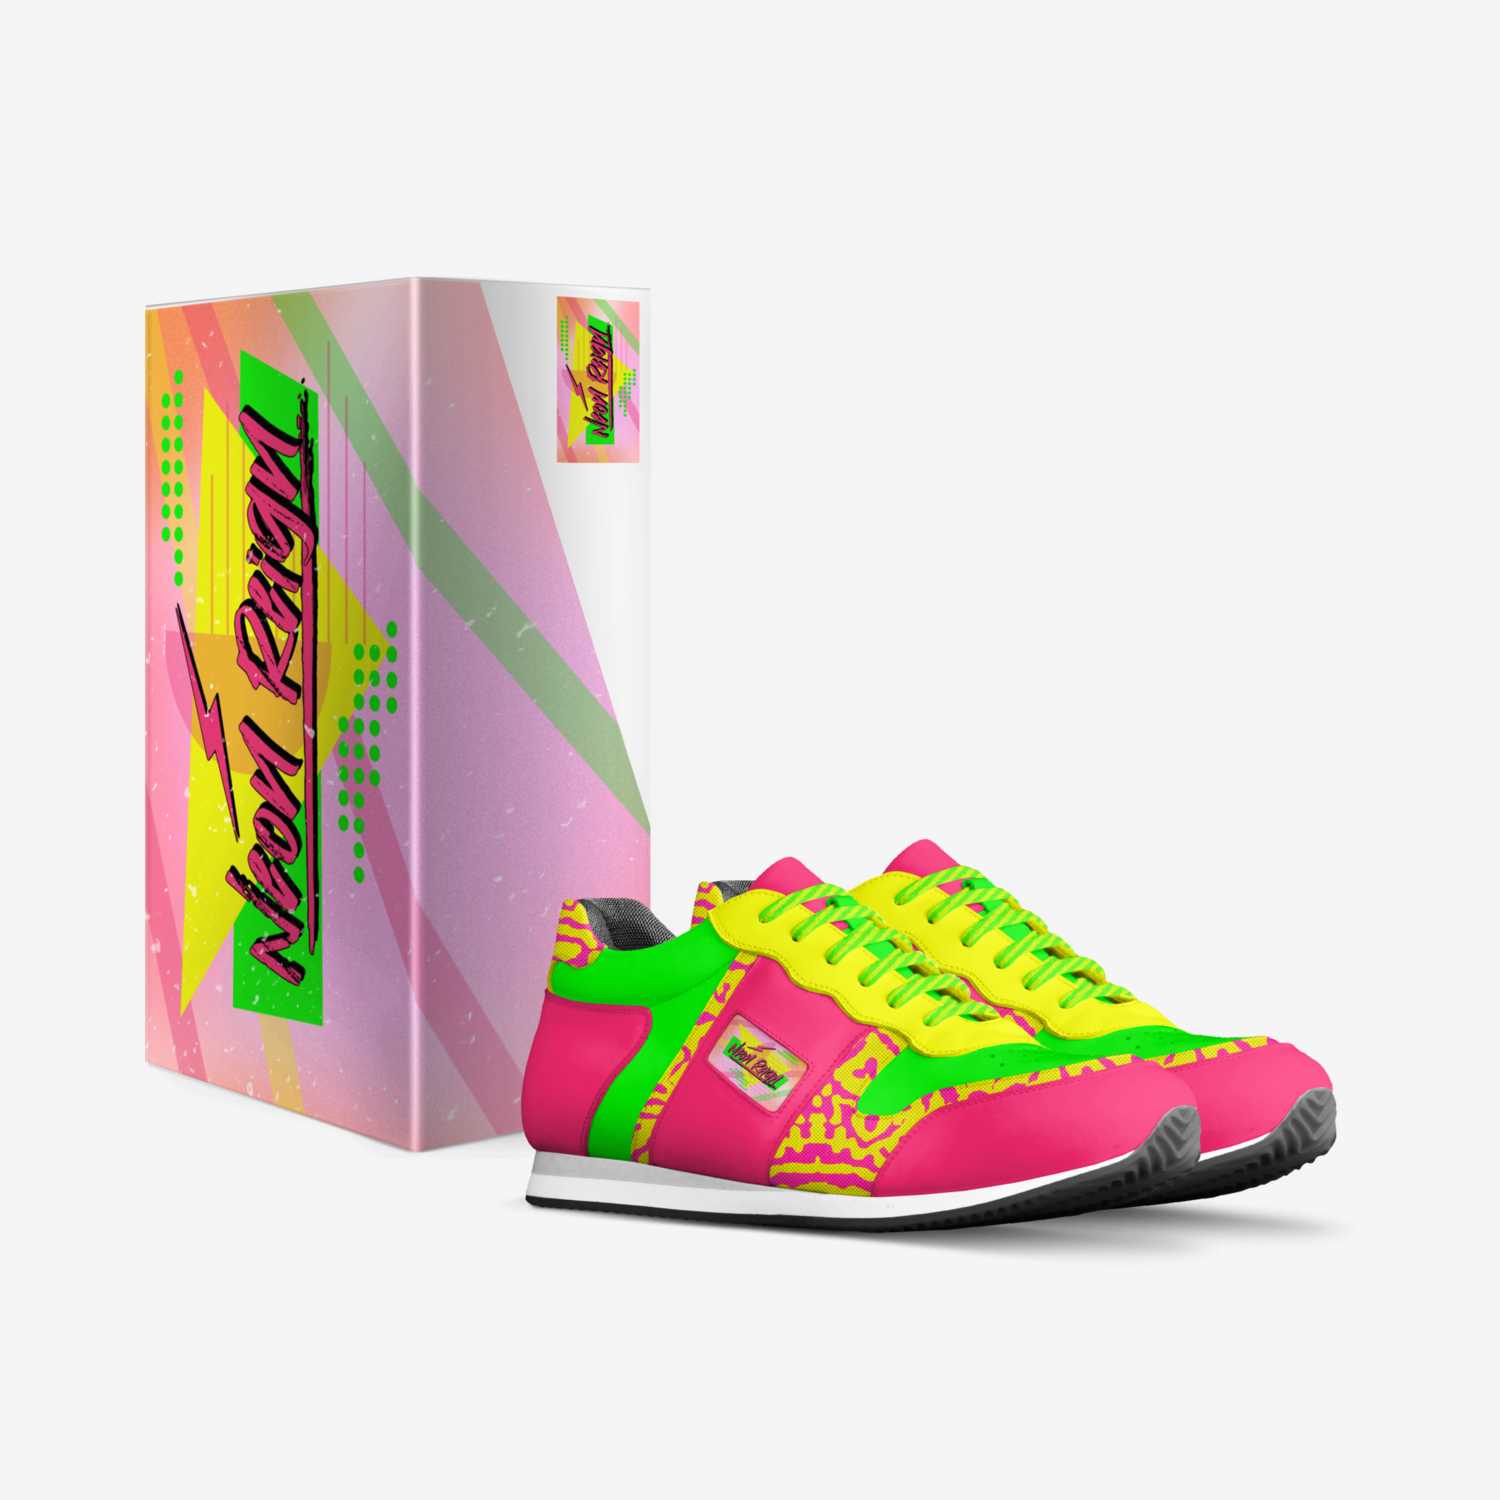 Neon Reign custom made in Italy shoes by Christian Stanley | Box view